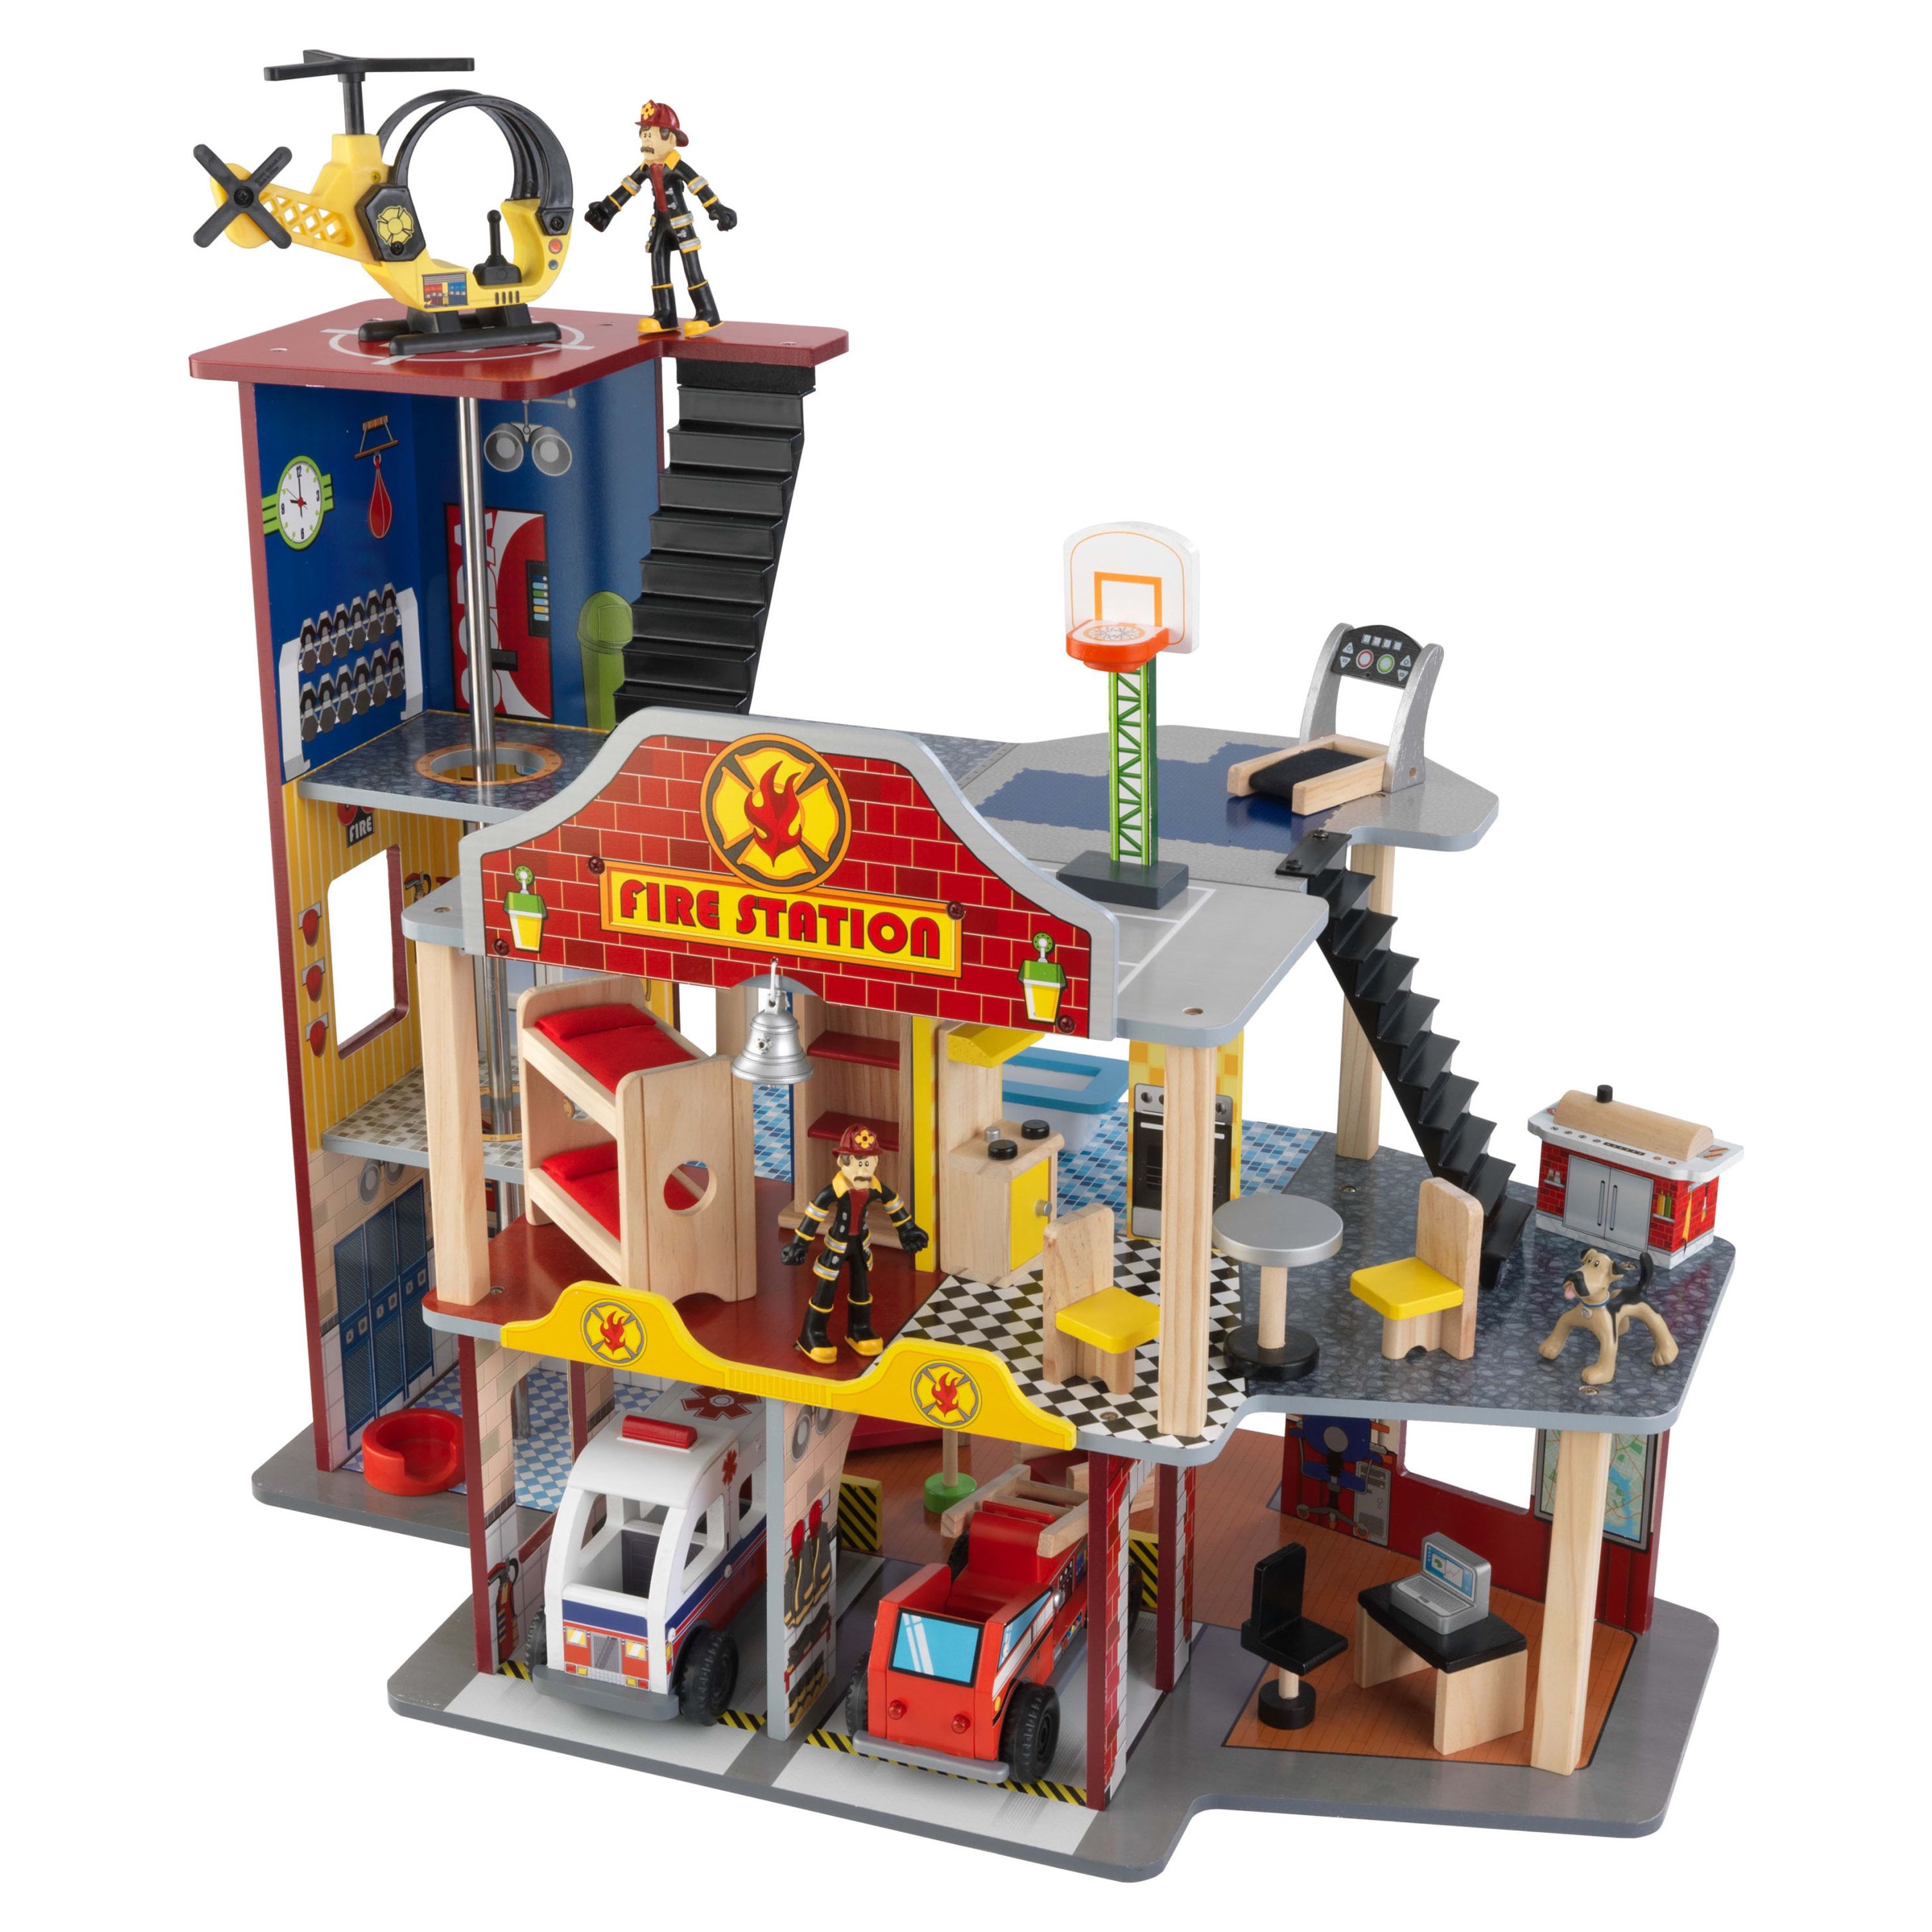 KidKraft Deluxe Wood Rescue Play Set with Ambulance, Fire Truck, Helicopter & 27 Pieces - image 1 of 7